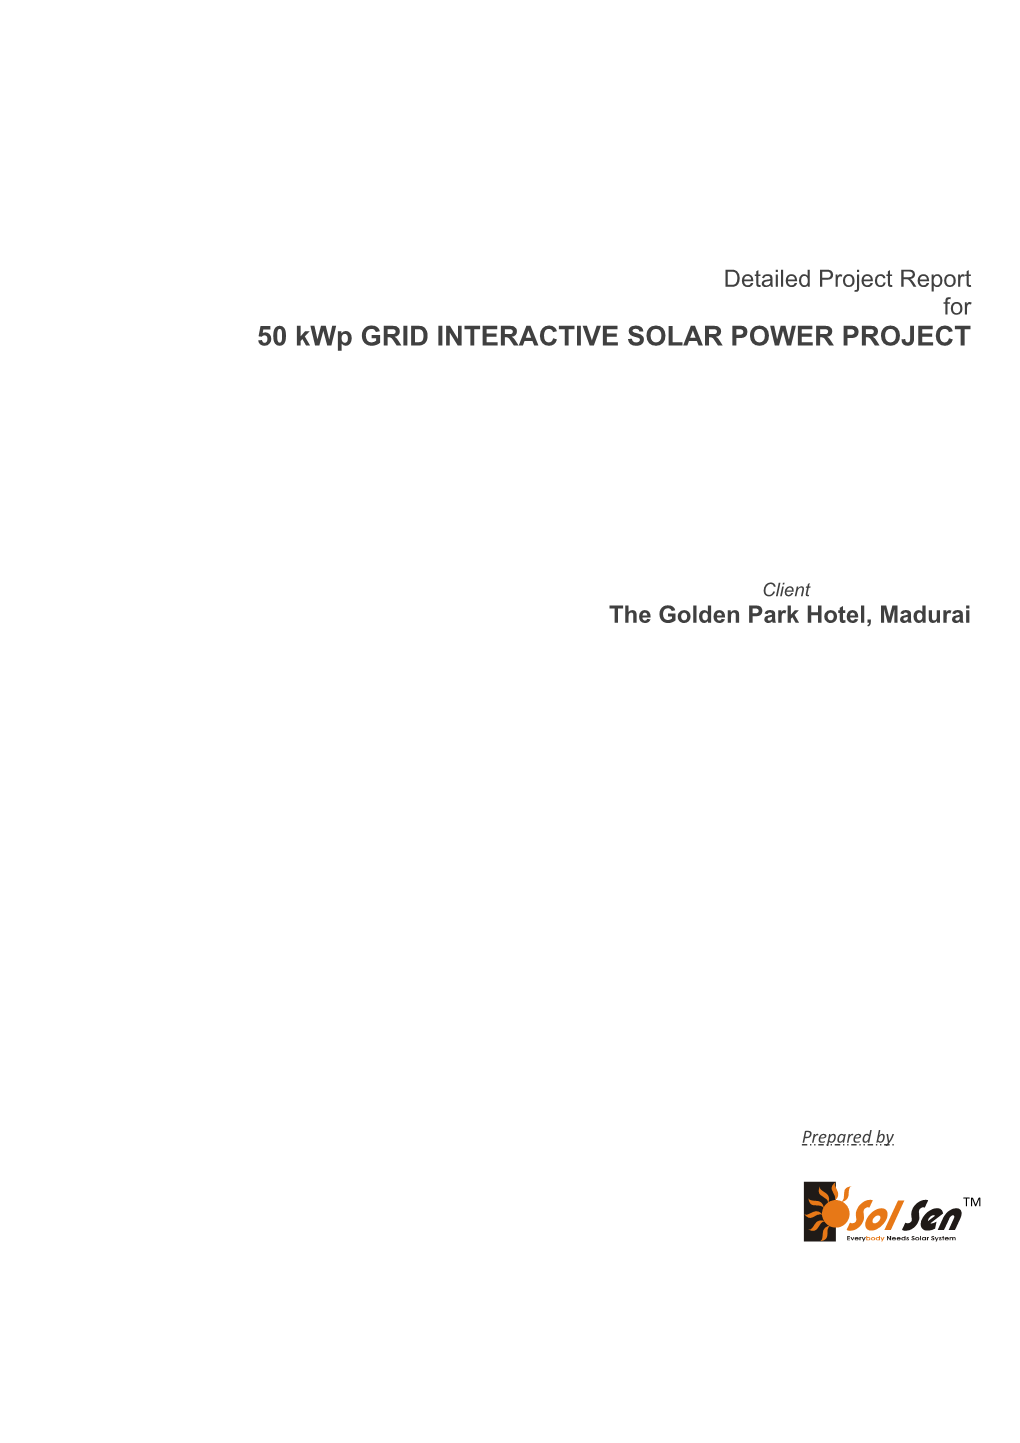 50 Kwp GRID INTERACTIVE SOLAR POWER PROJECT